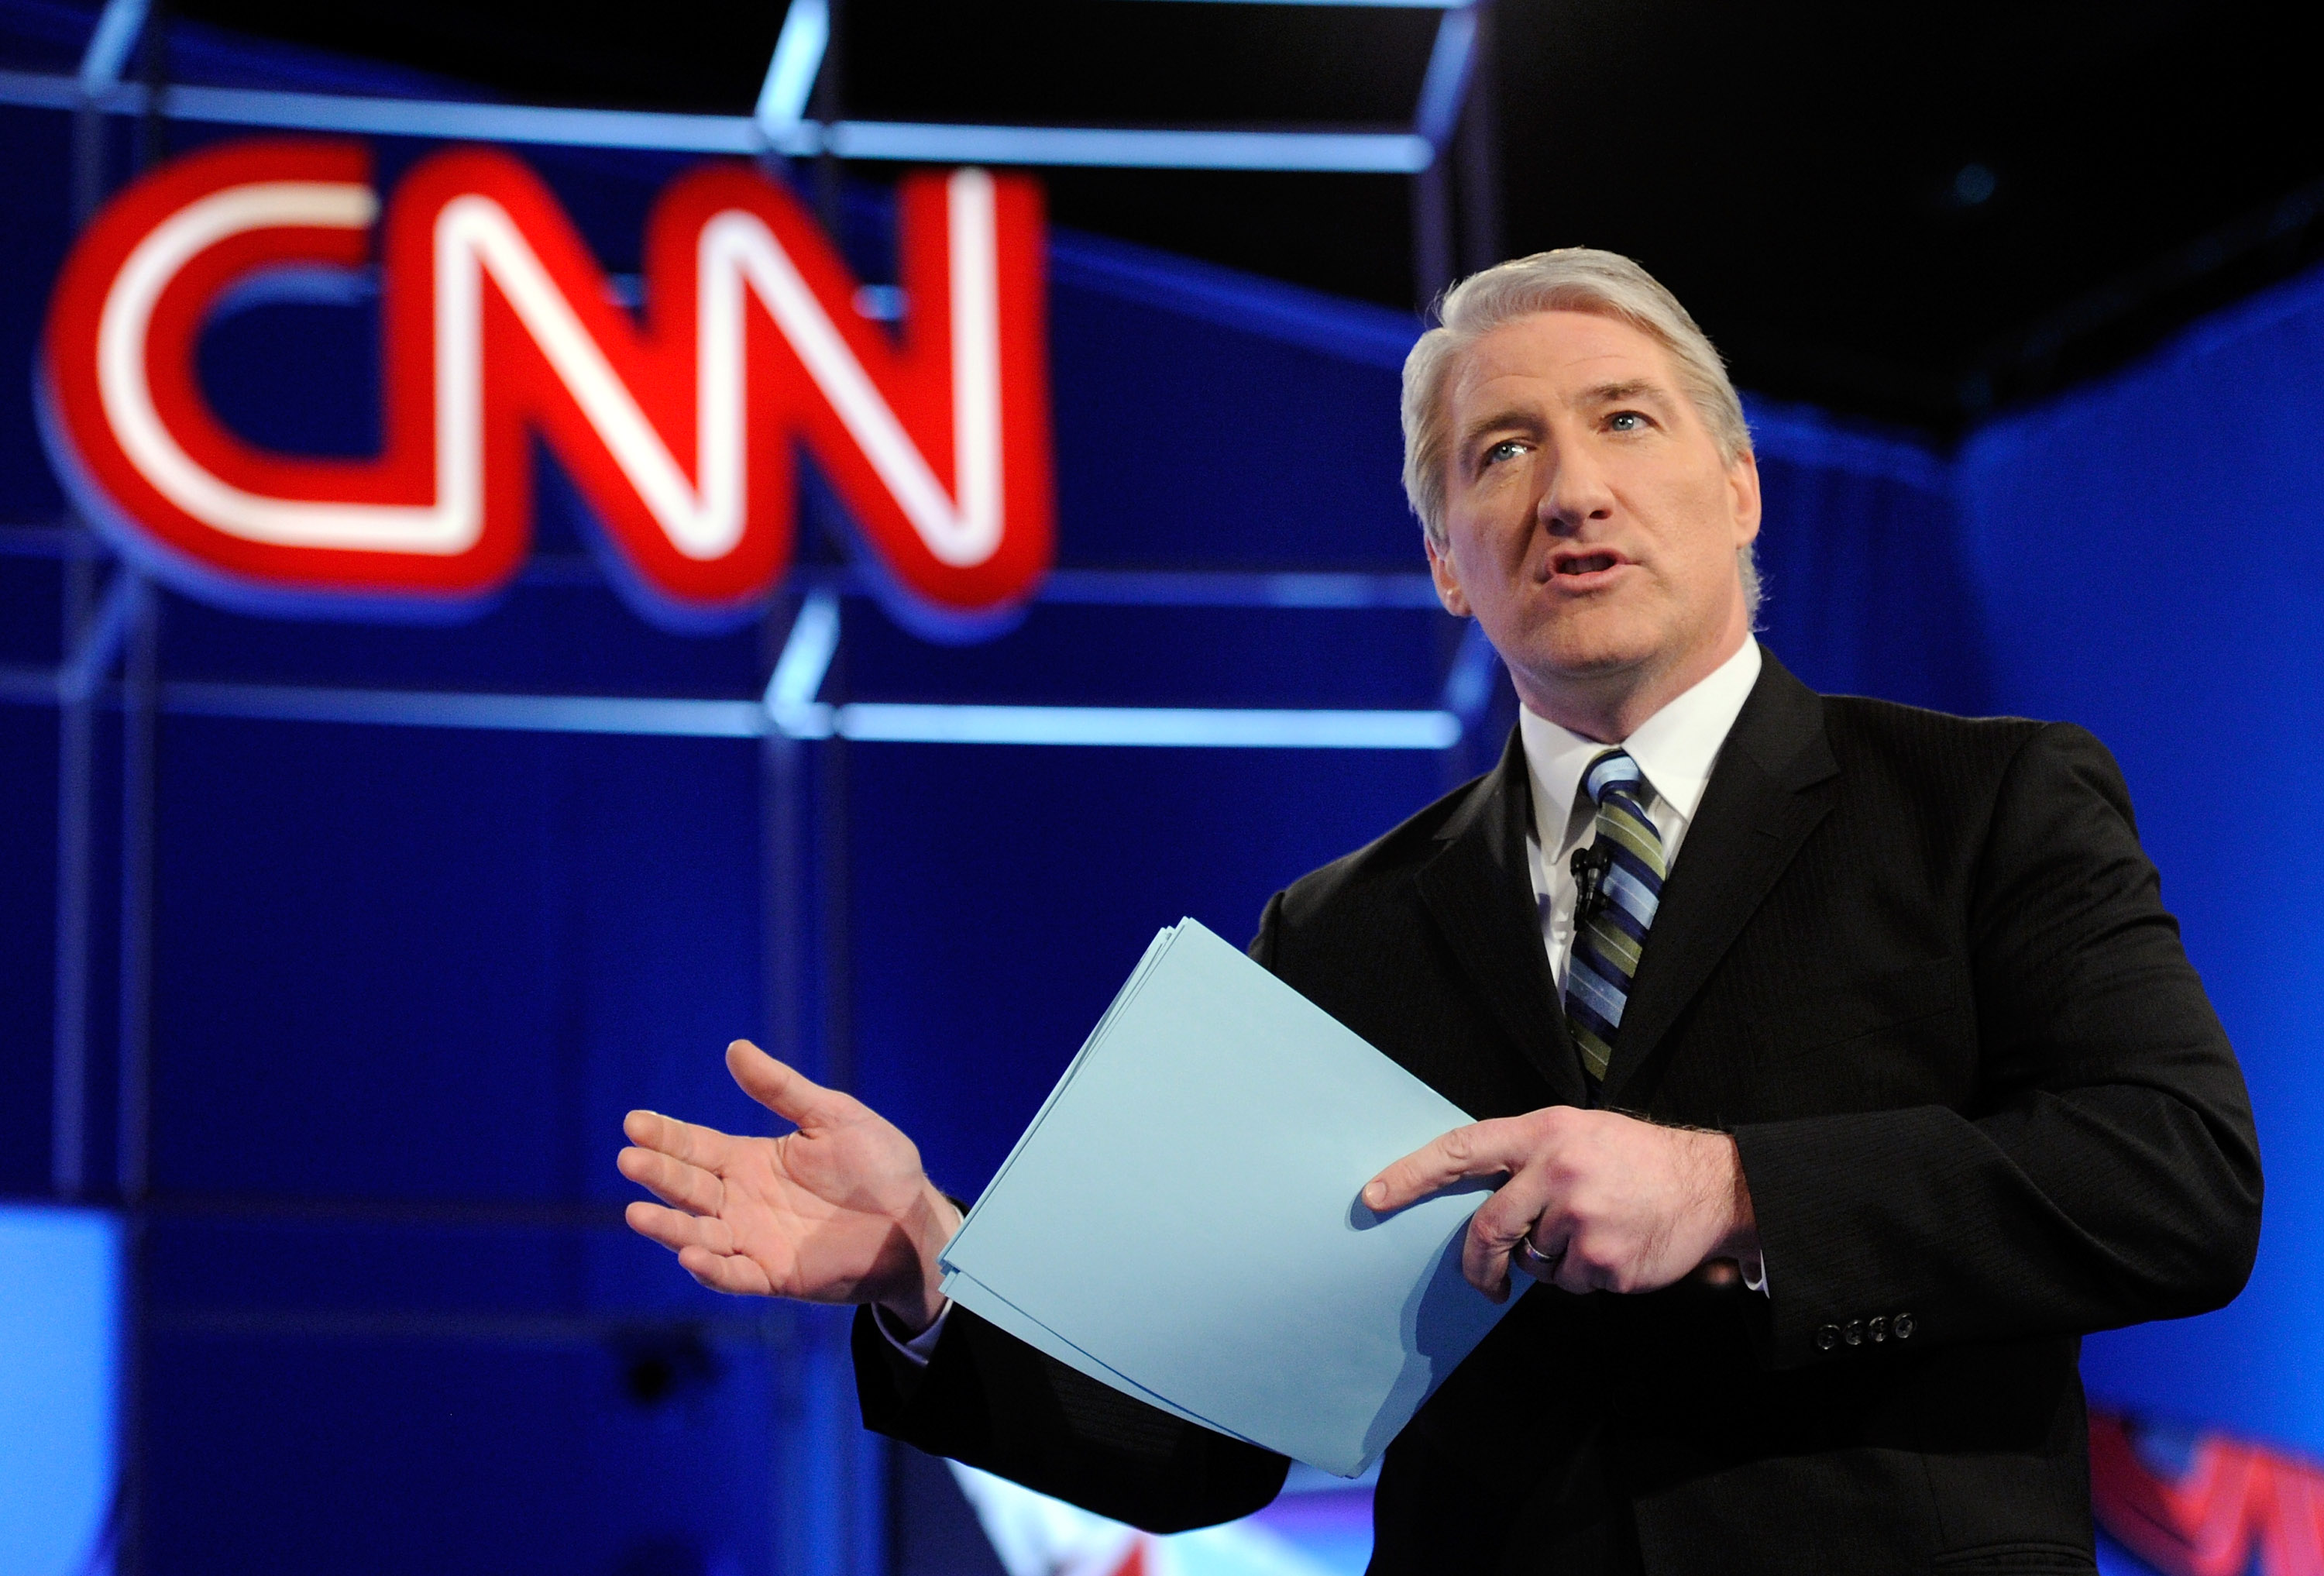 CNN correspondent John King talks to the audience before moderating a debate between Republican presidential candidates on February 22, 2012 in Mesa, Arizona. On Nov. 6, 2018 the CNN correspondent John King was seen walking around aimlessly around the CNN studio during the midterm election. (Ethan Miller—Getty Images)